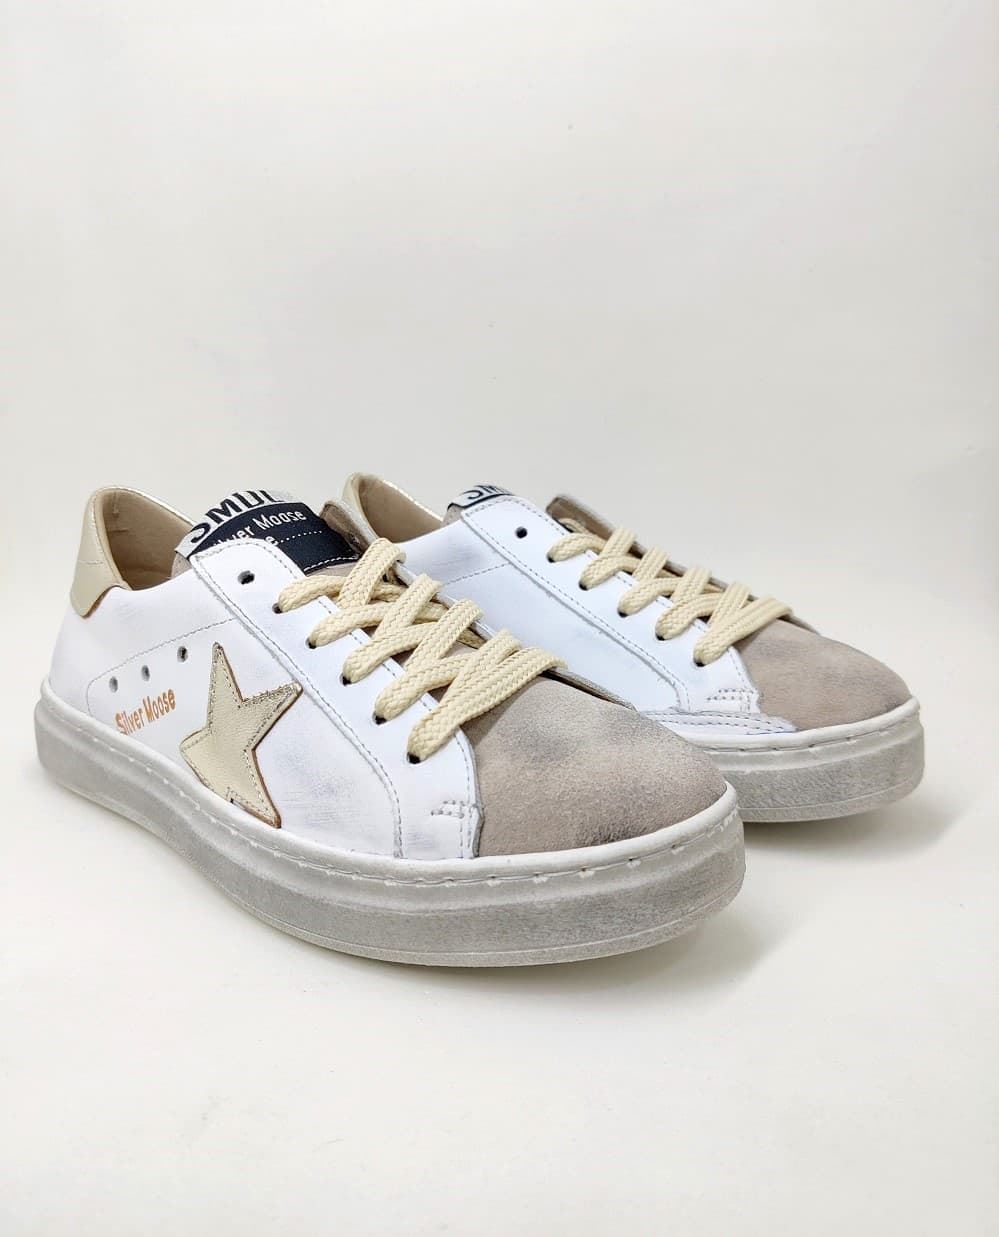 Golden Star sneakers in White/Gold leather - Image 4